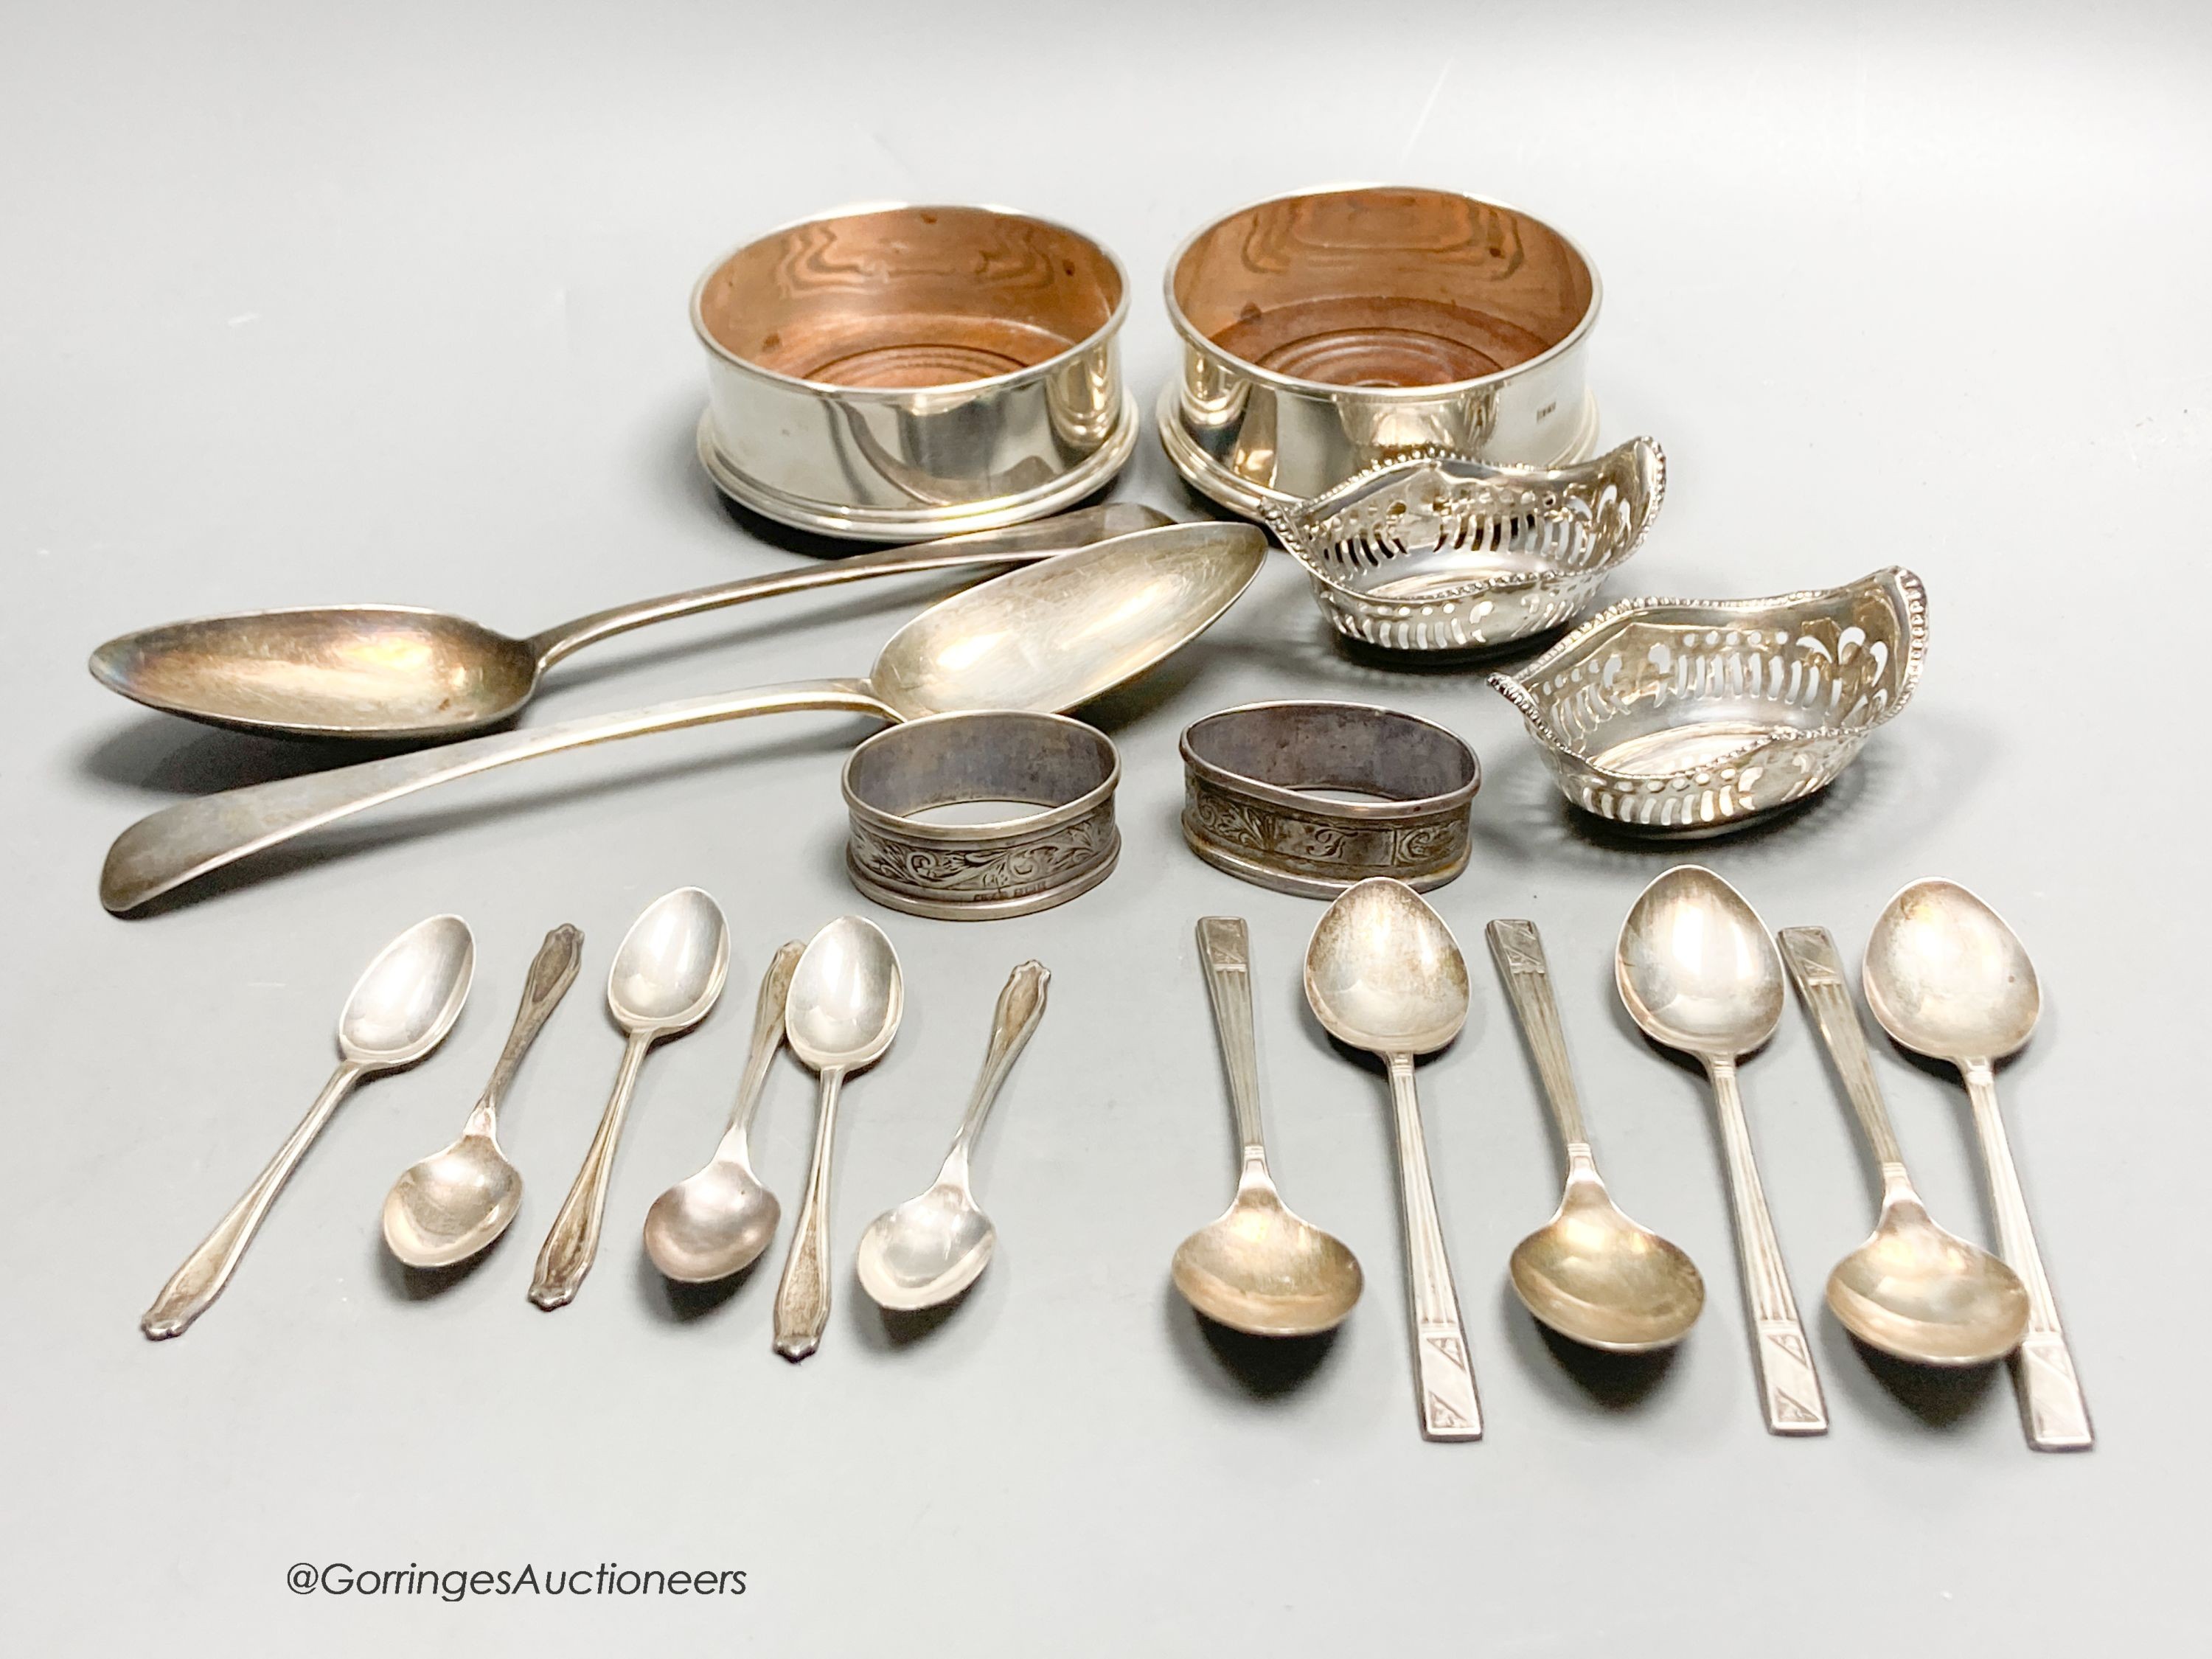 A pair of George III silver tablespoons, a pair of modern silver bottle coasters, a pair of pierced silver bon bon dishes, six silver teaspoons and 6 silver coffee spoons.